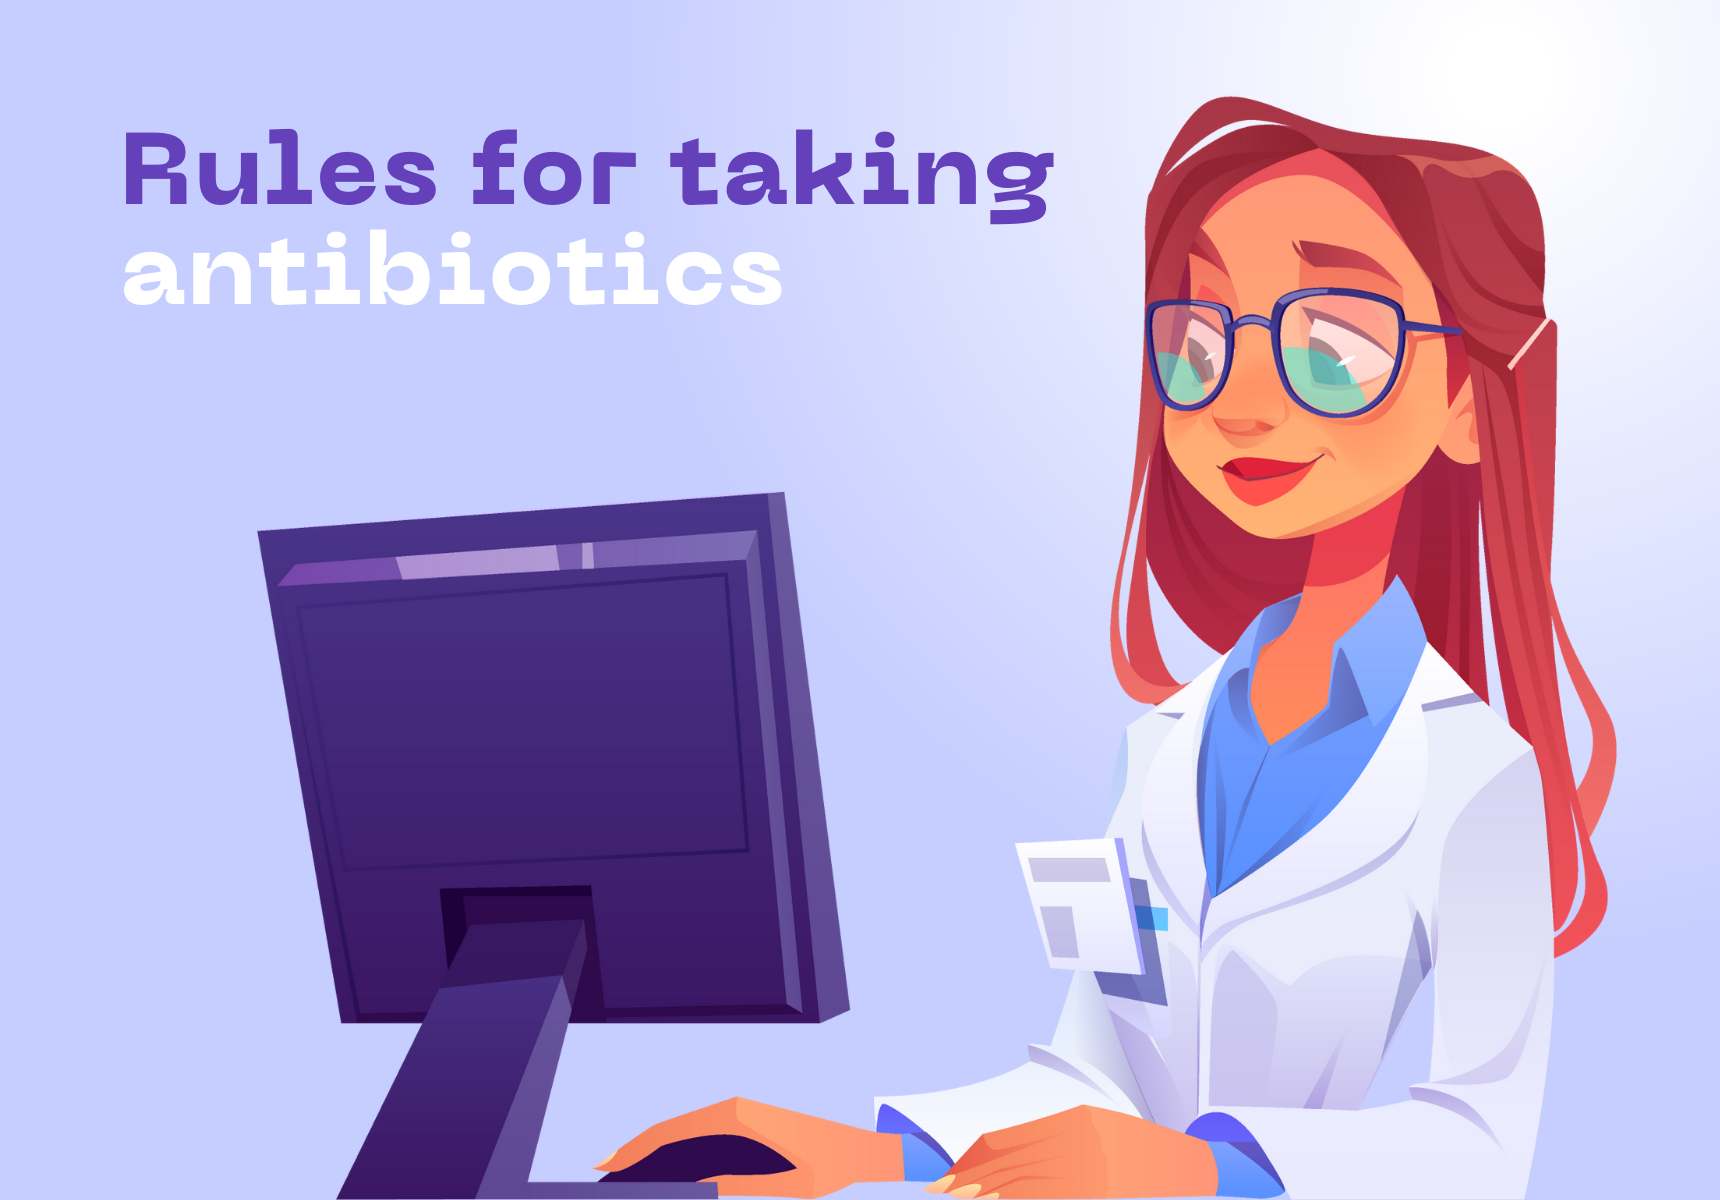 rules for taking antibiotics from pharmacist